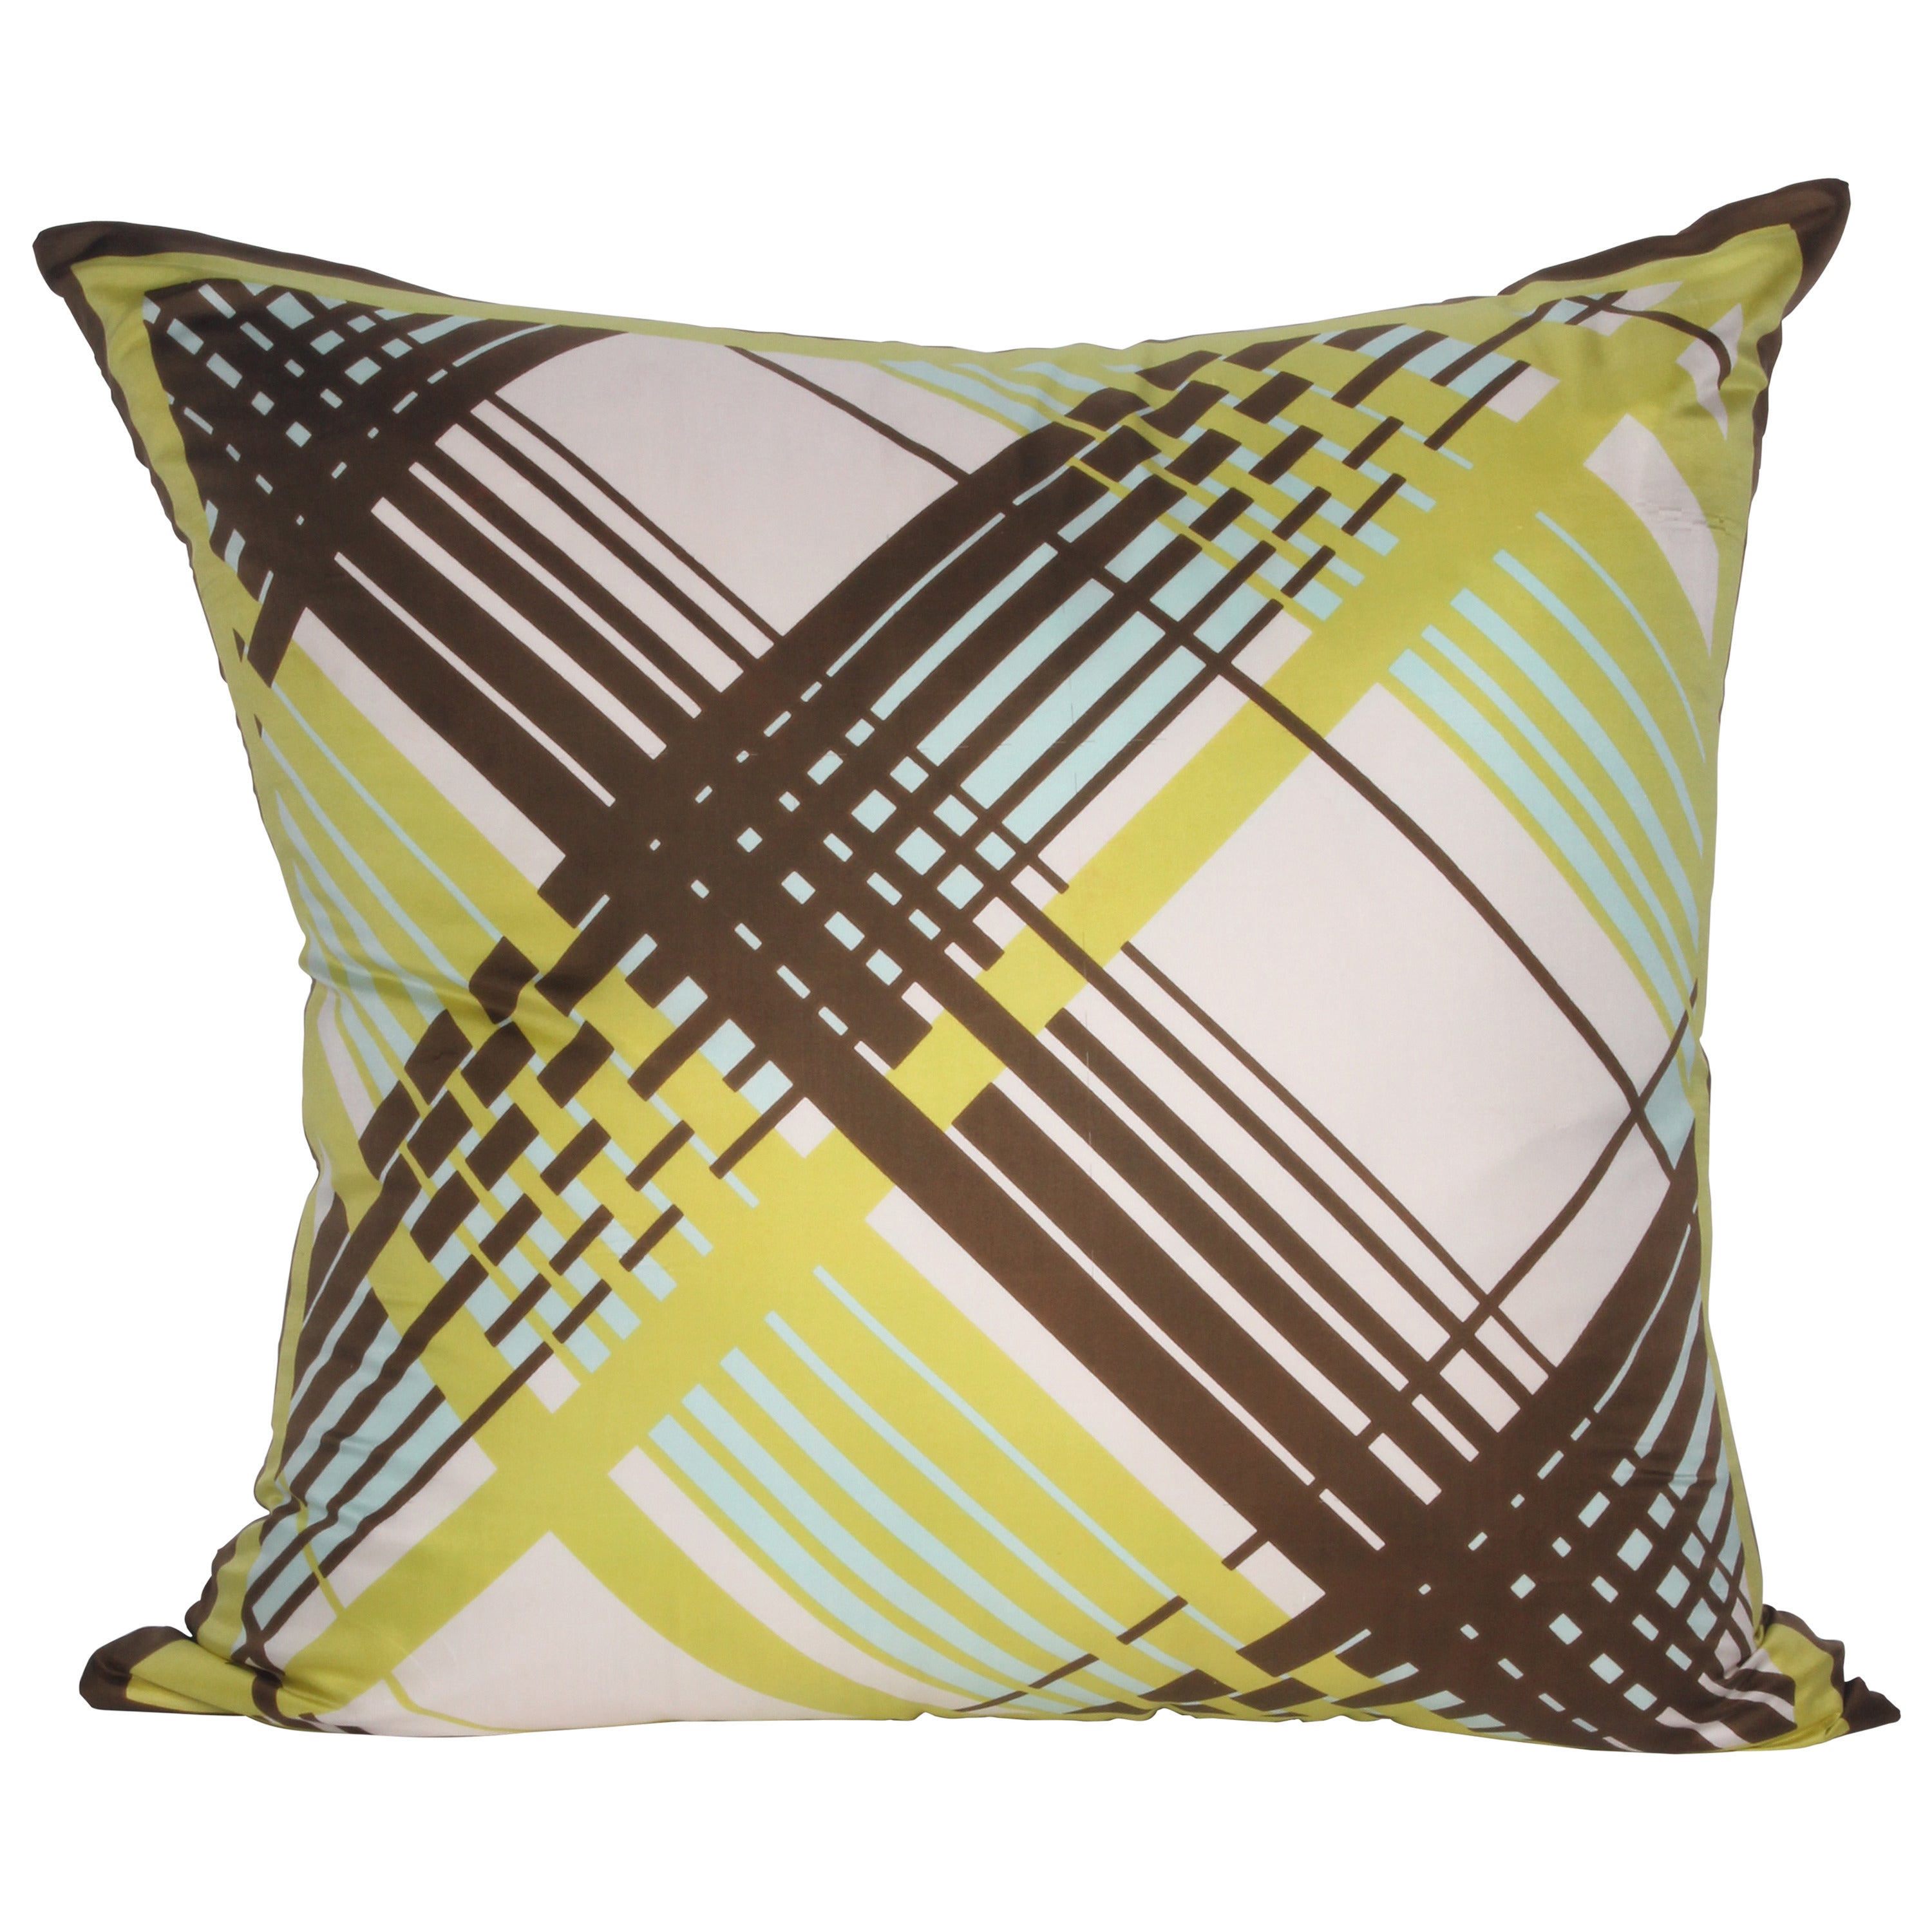 Odile St. Germain Scarf Pillow For Sale